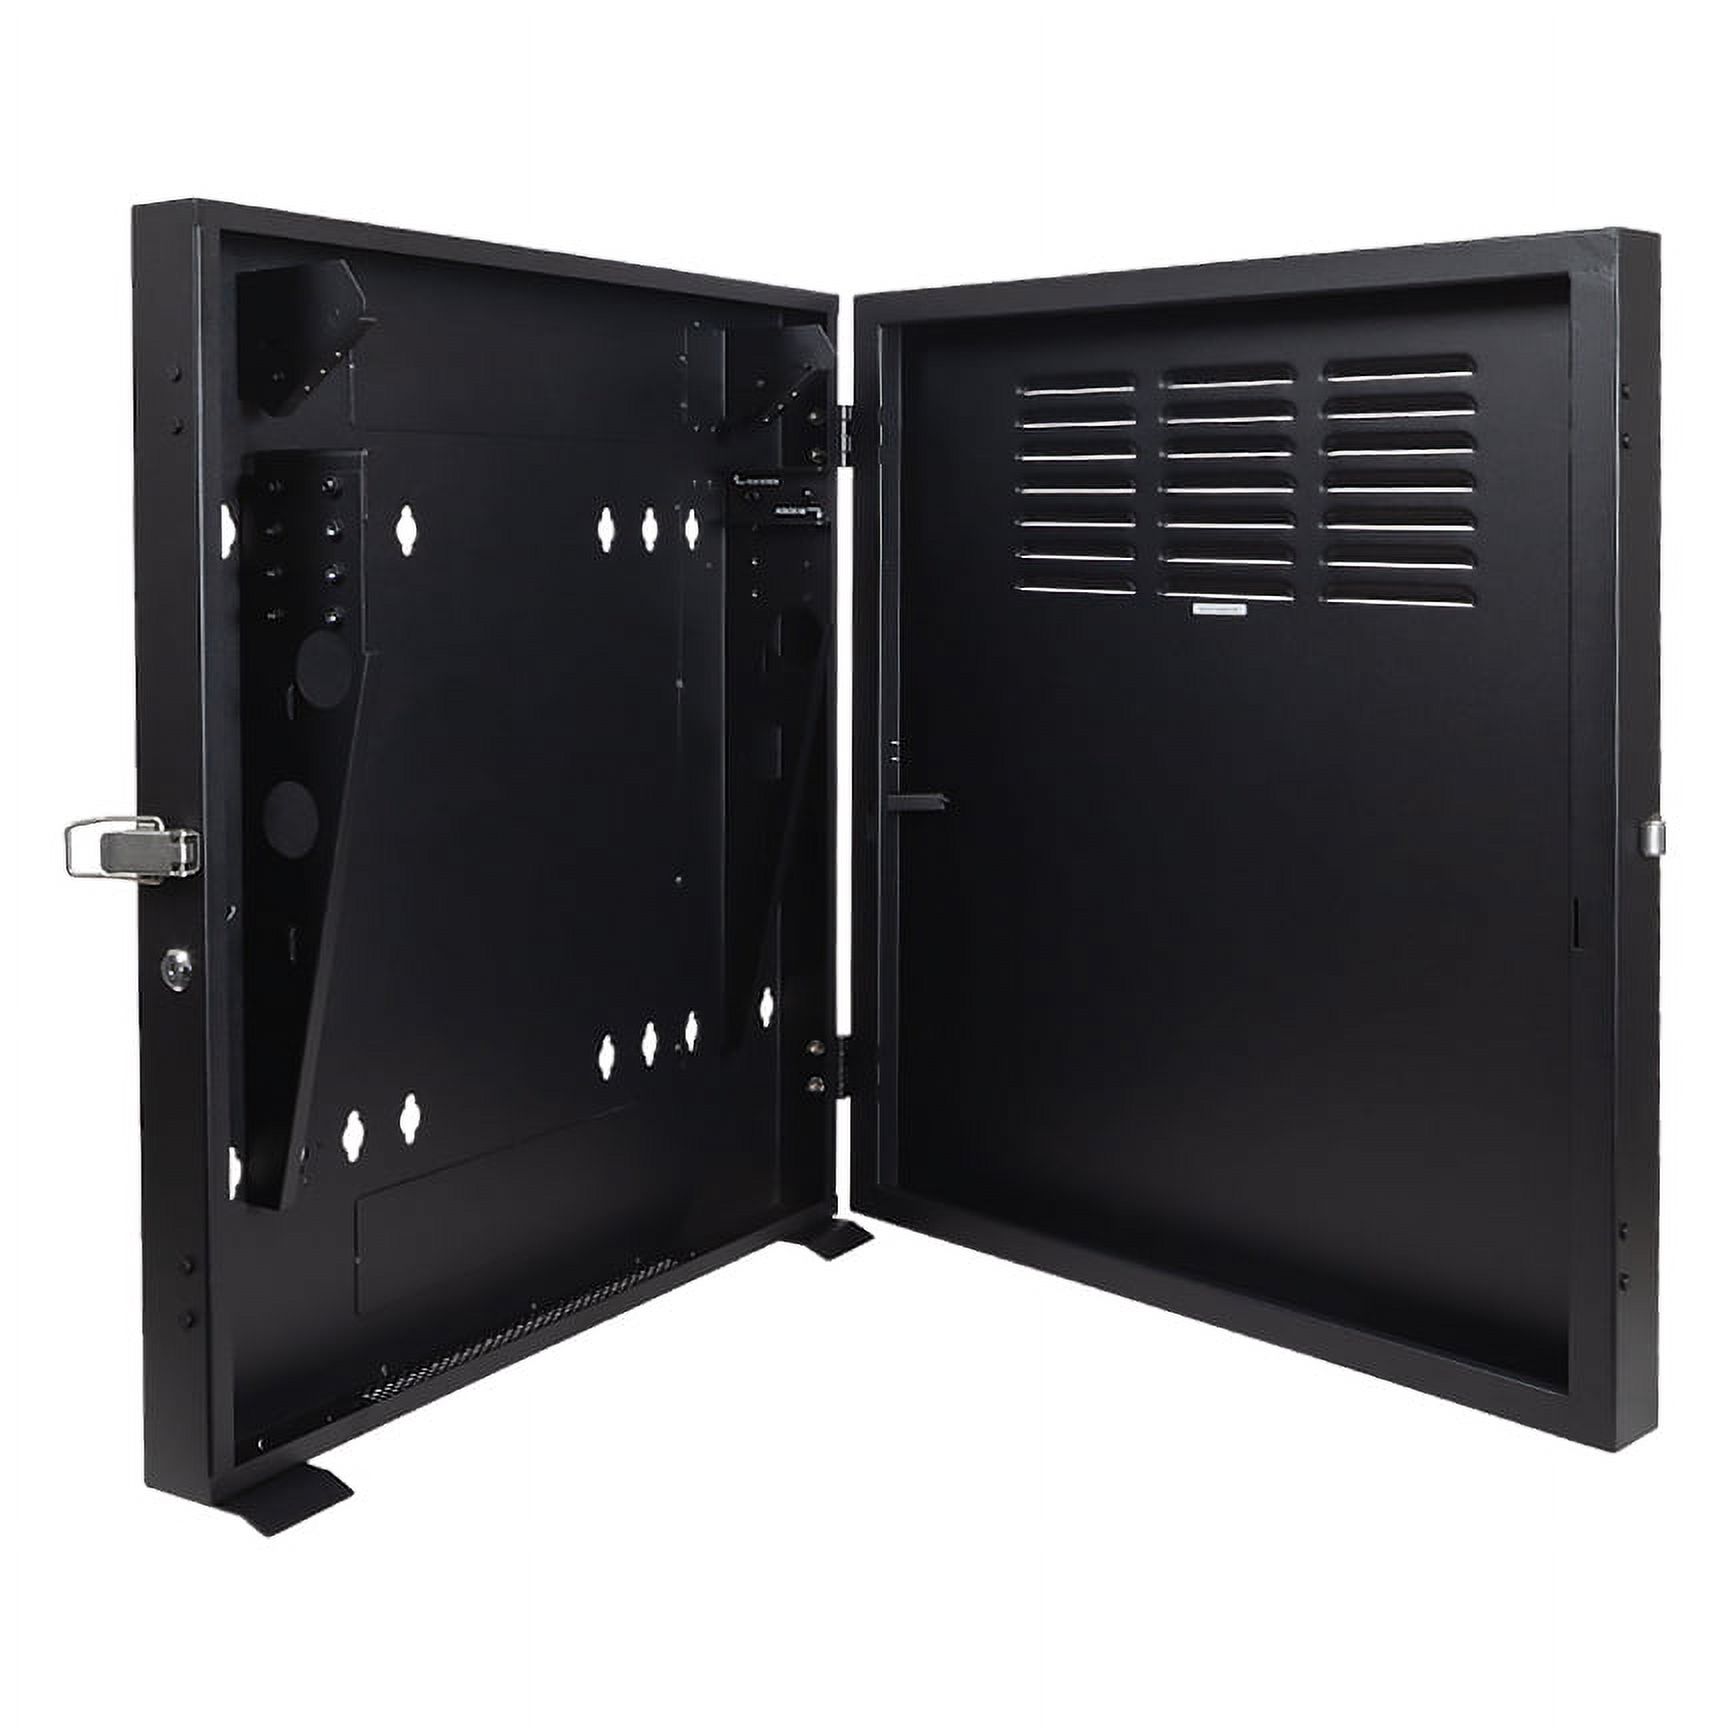 NavePoint 2U Vertical Wall Mount Enclosure for 19" Networking Equipment, Servers, Switch and Patch Panels, Low Profile, 20" Depths, Max Weight Capacity 150 Lbs - image 4 of 6